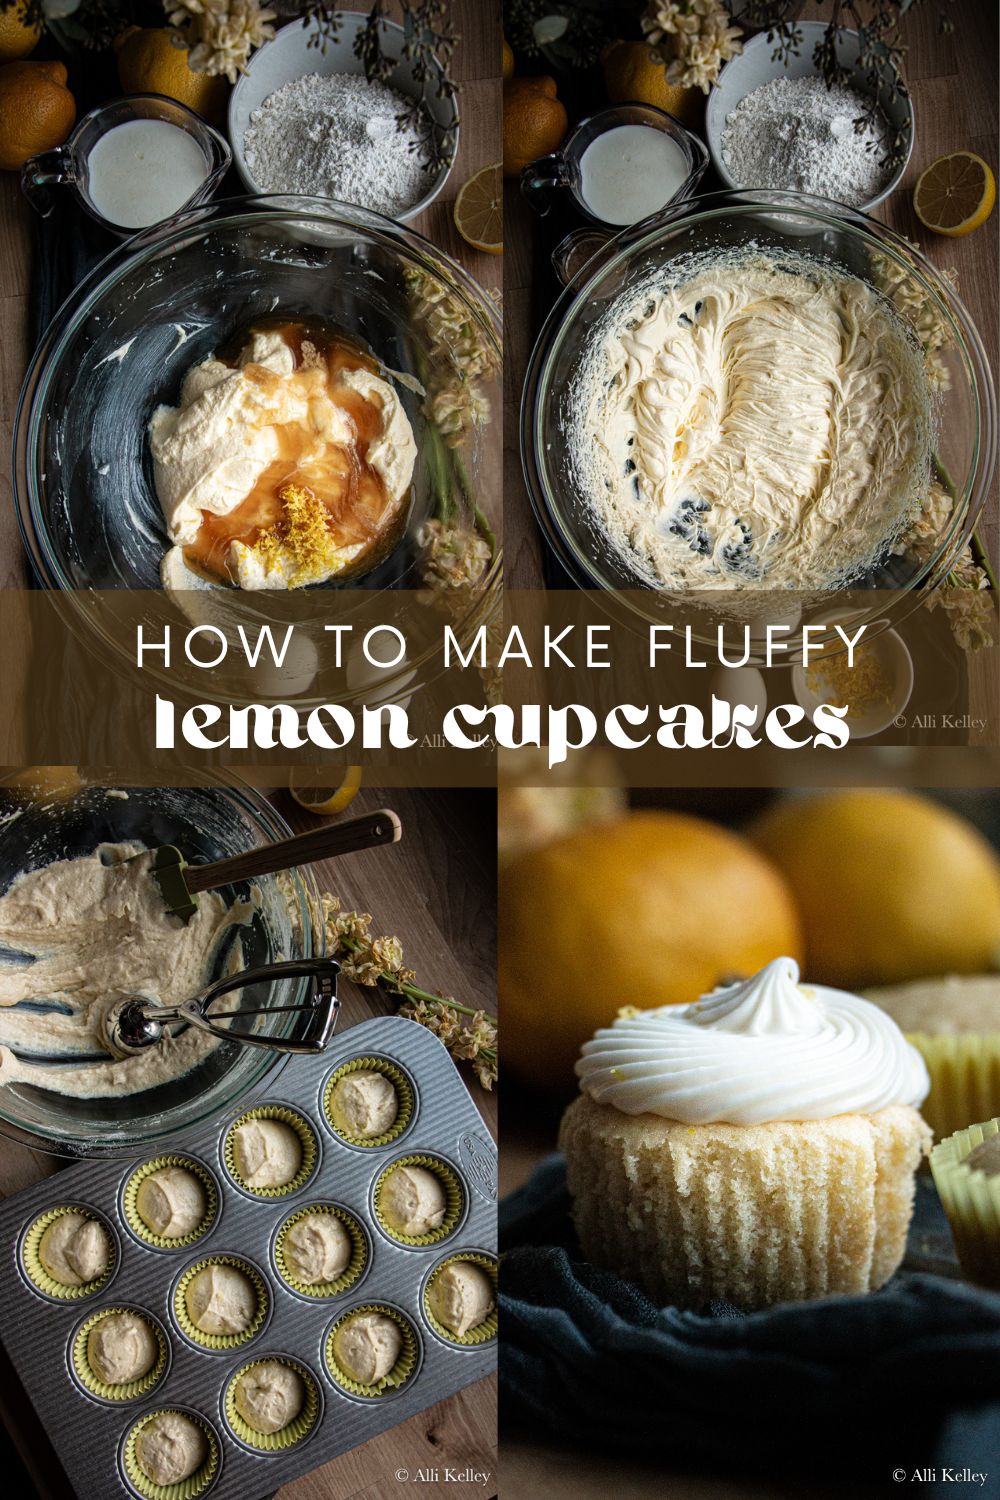 Simple recipe for moist & flavorful honey lemon cupcakes plus three amazing baking tips to make sure your baked goods don't turn out dry or tough! #cupcakes #baking #bakingday #cake #lemon #honey #honeylemon #lemonhoney #lemoncupcakes #lemoncake #lemonhoneycake #honeylemoncake #honeylemoncupcakes #citrus